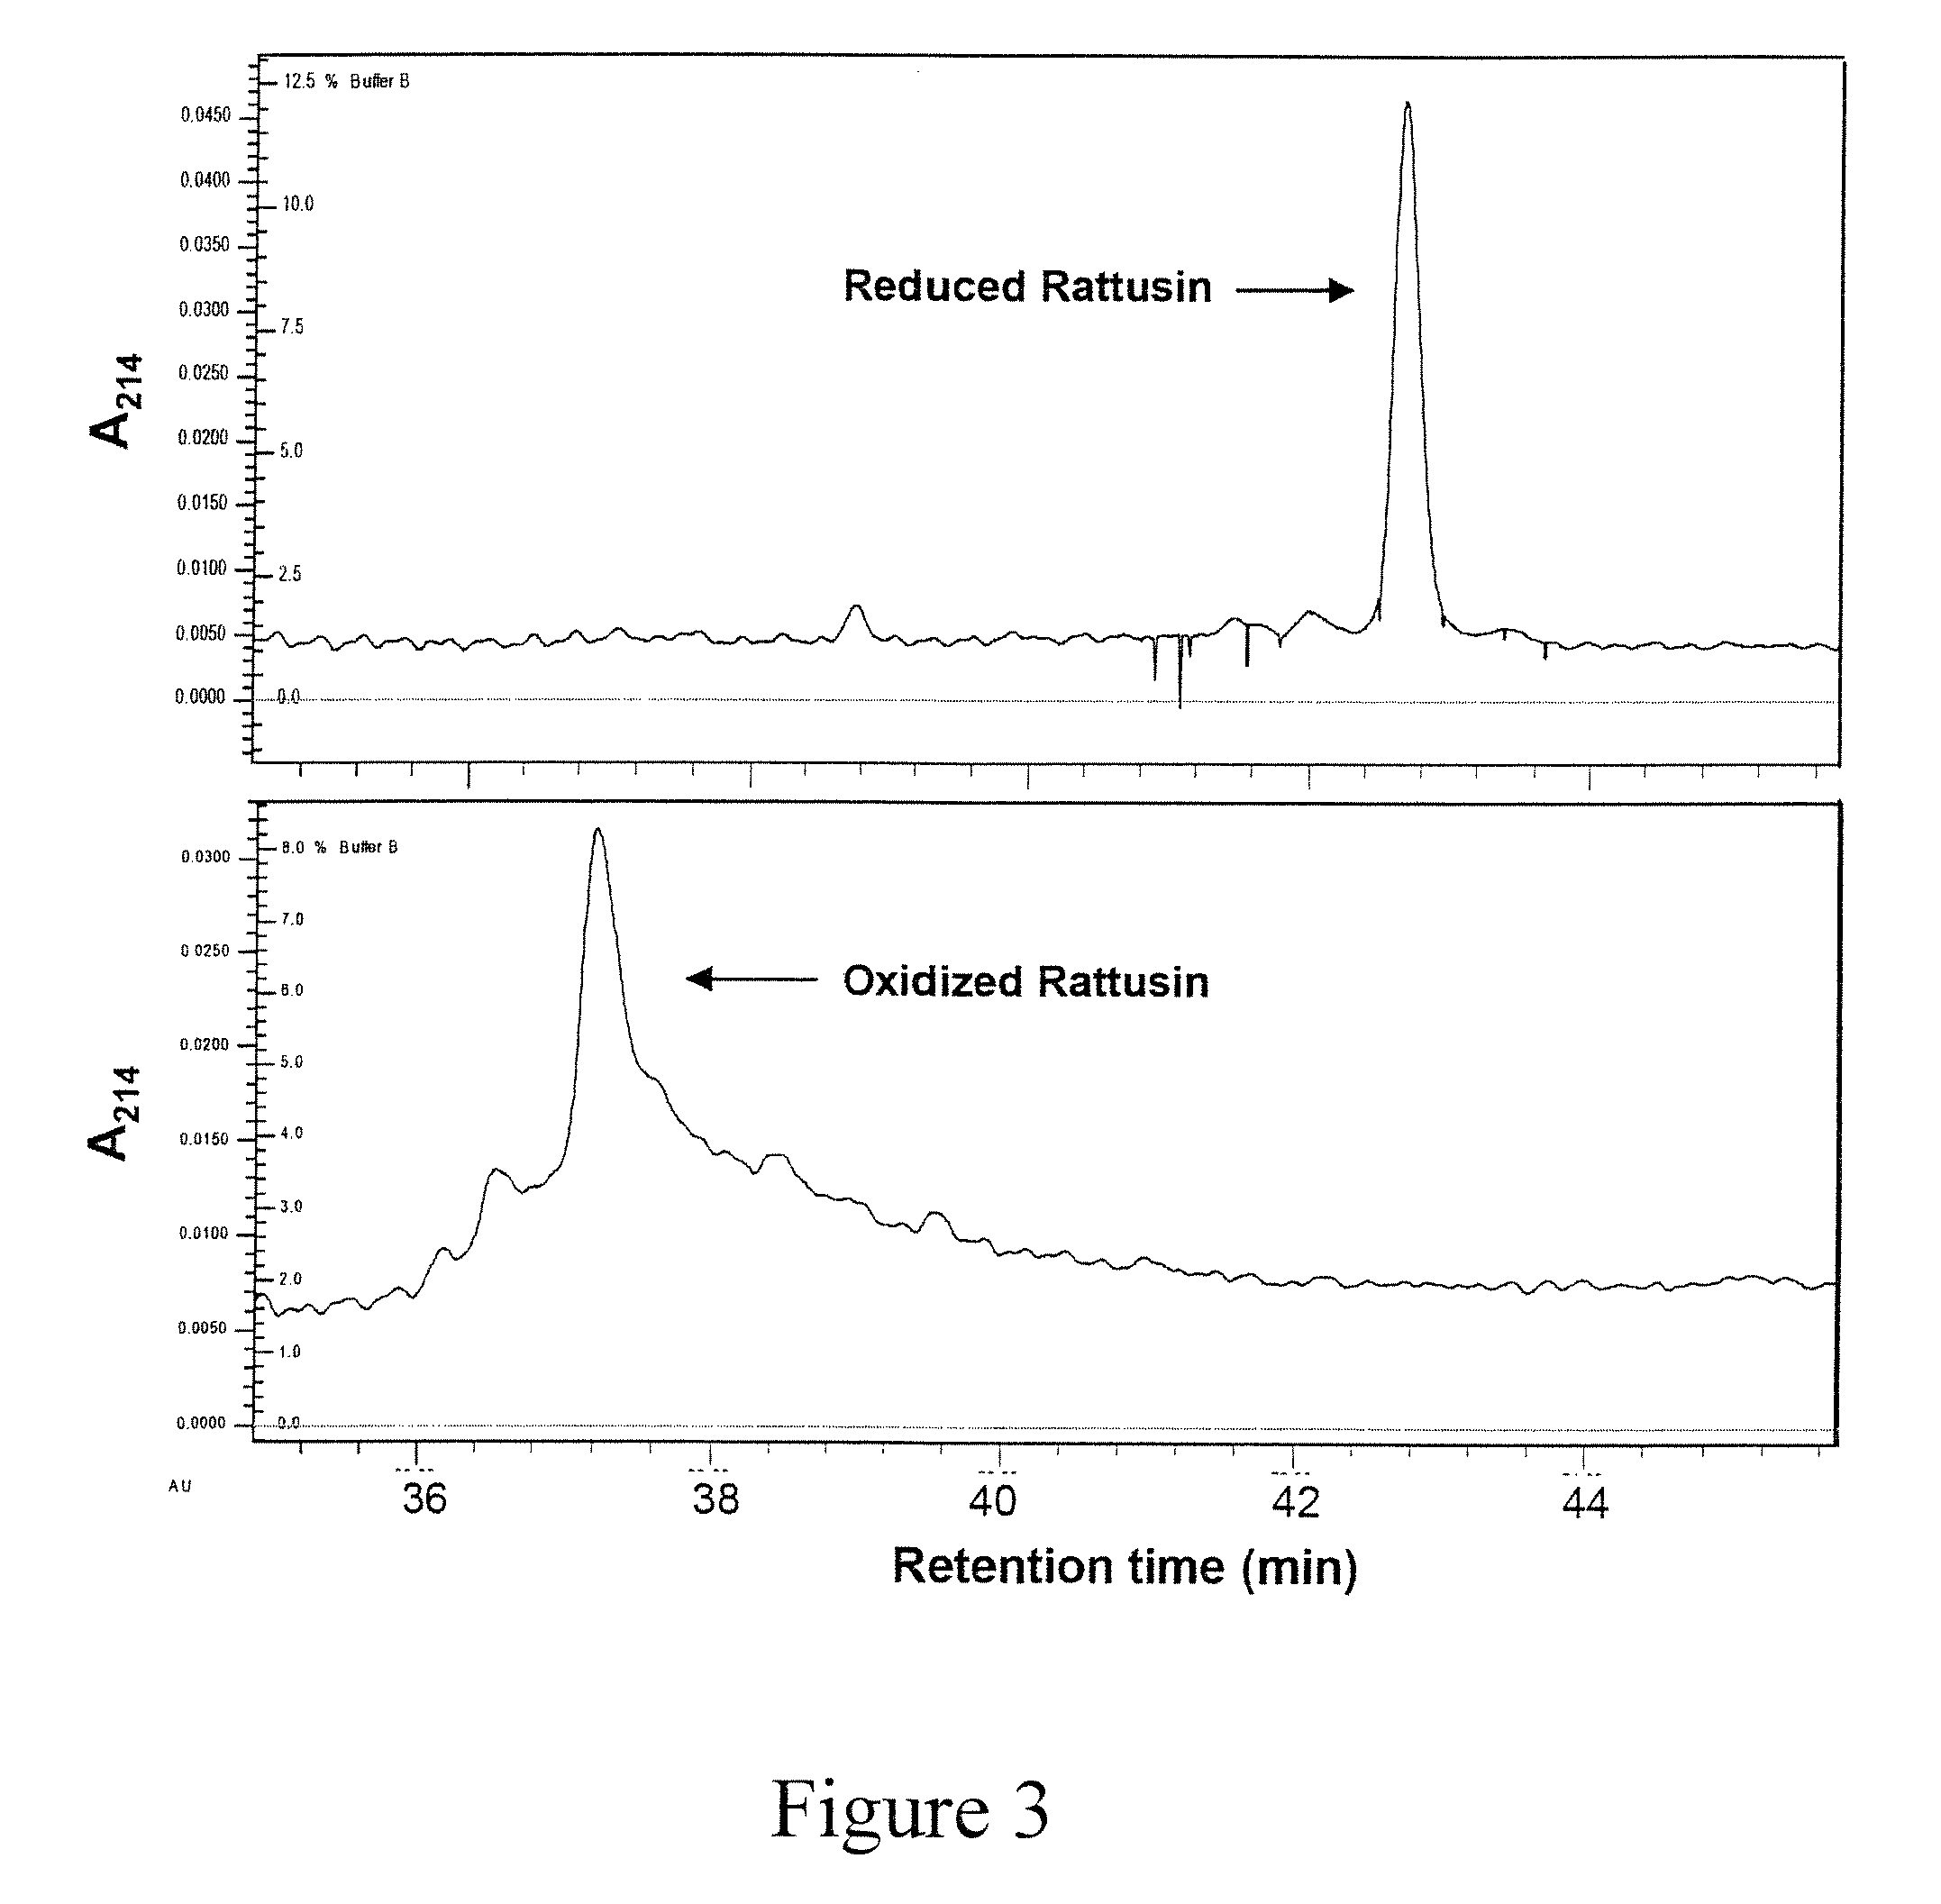 Anti-microbial defensin-related peptides and methods of use